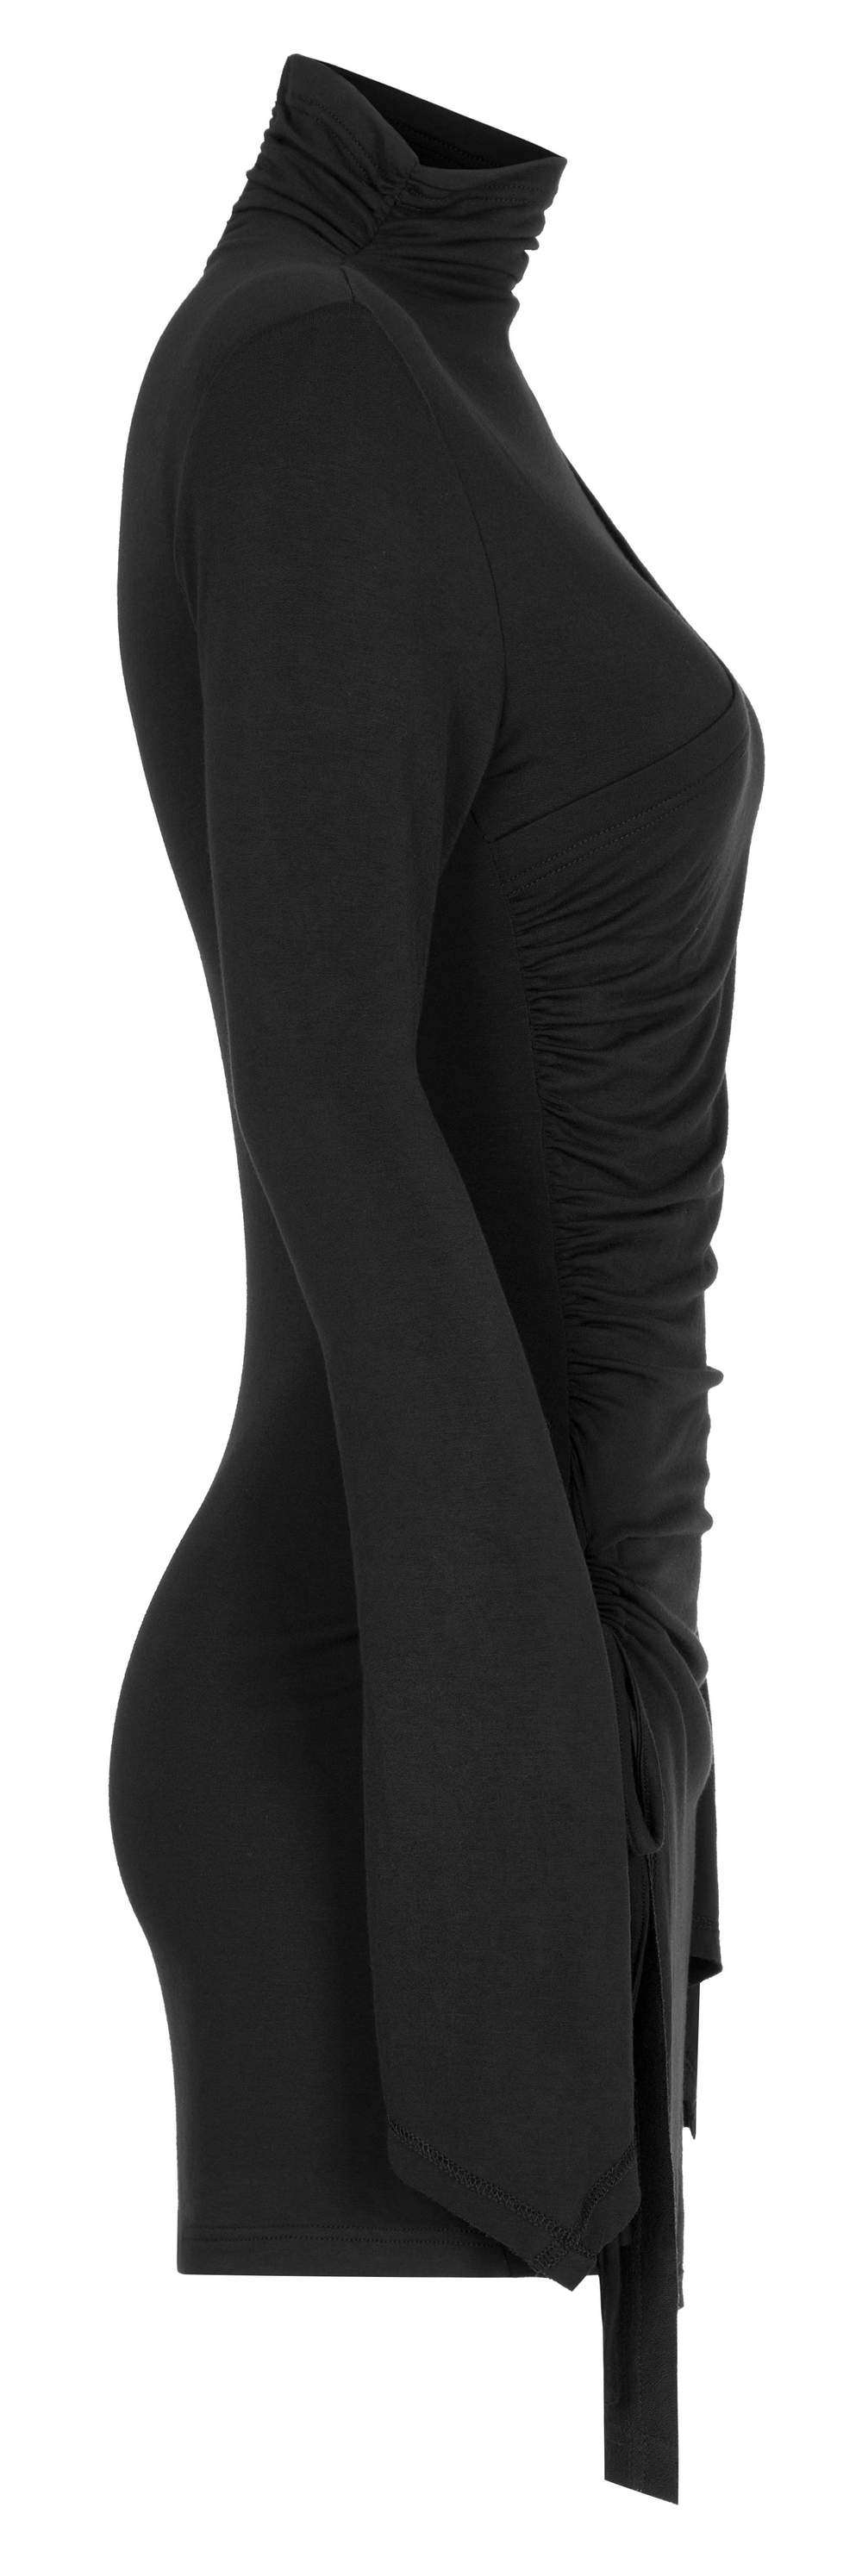 Black Turtleneck Dress with Side Pleats and Tie Detail